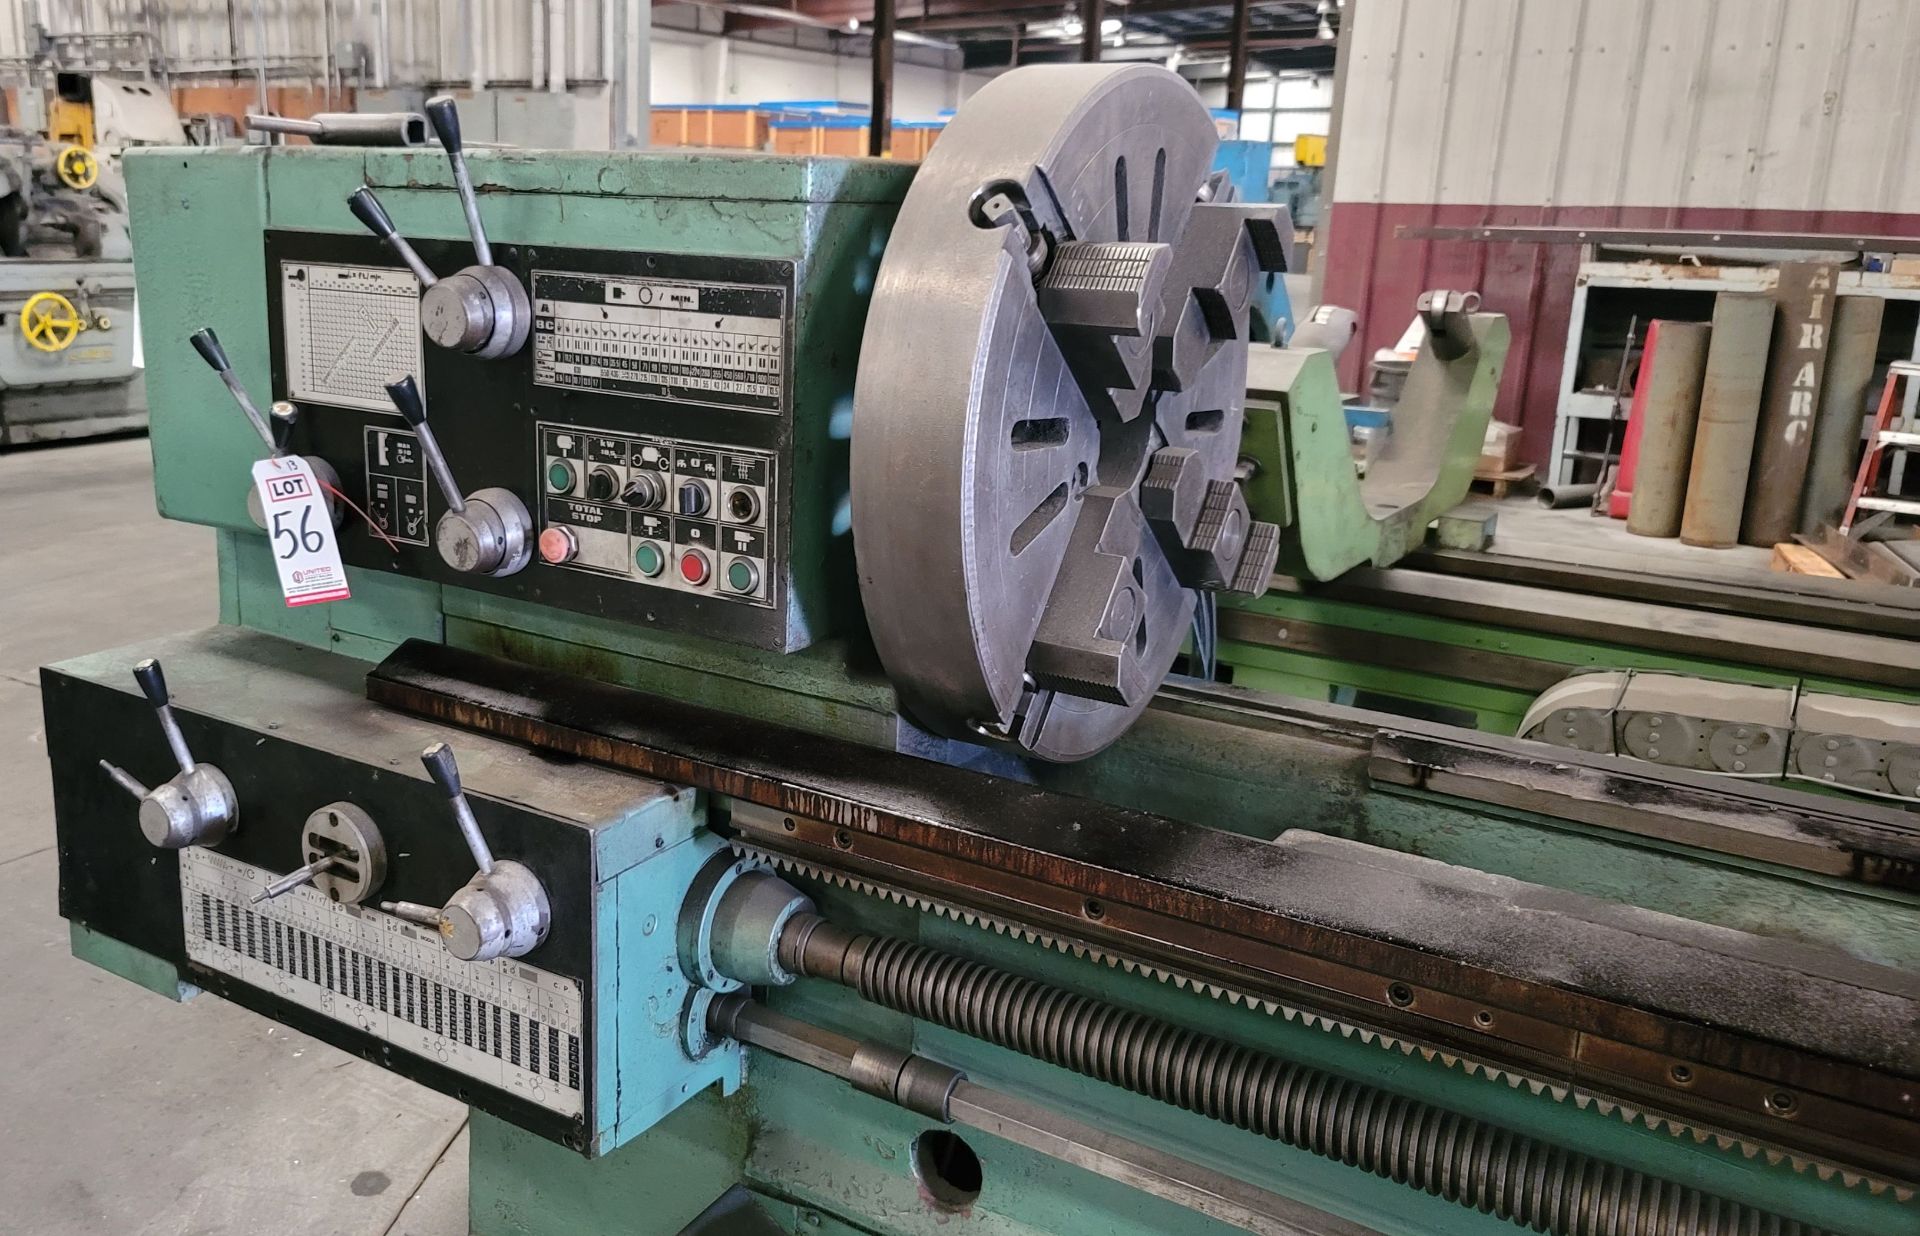 TOS ENGINE LATHE, MODEL SUS-63, 25" X 320", 26" 4-JAW CHUCK, TAILSTOCK, STEADY REST, S/N 436809 - Image 8 of 9